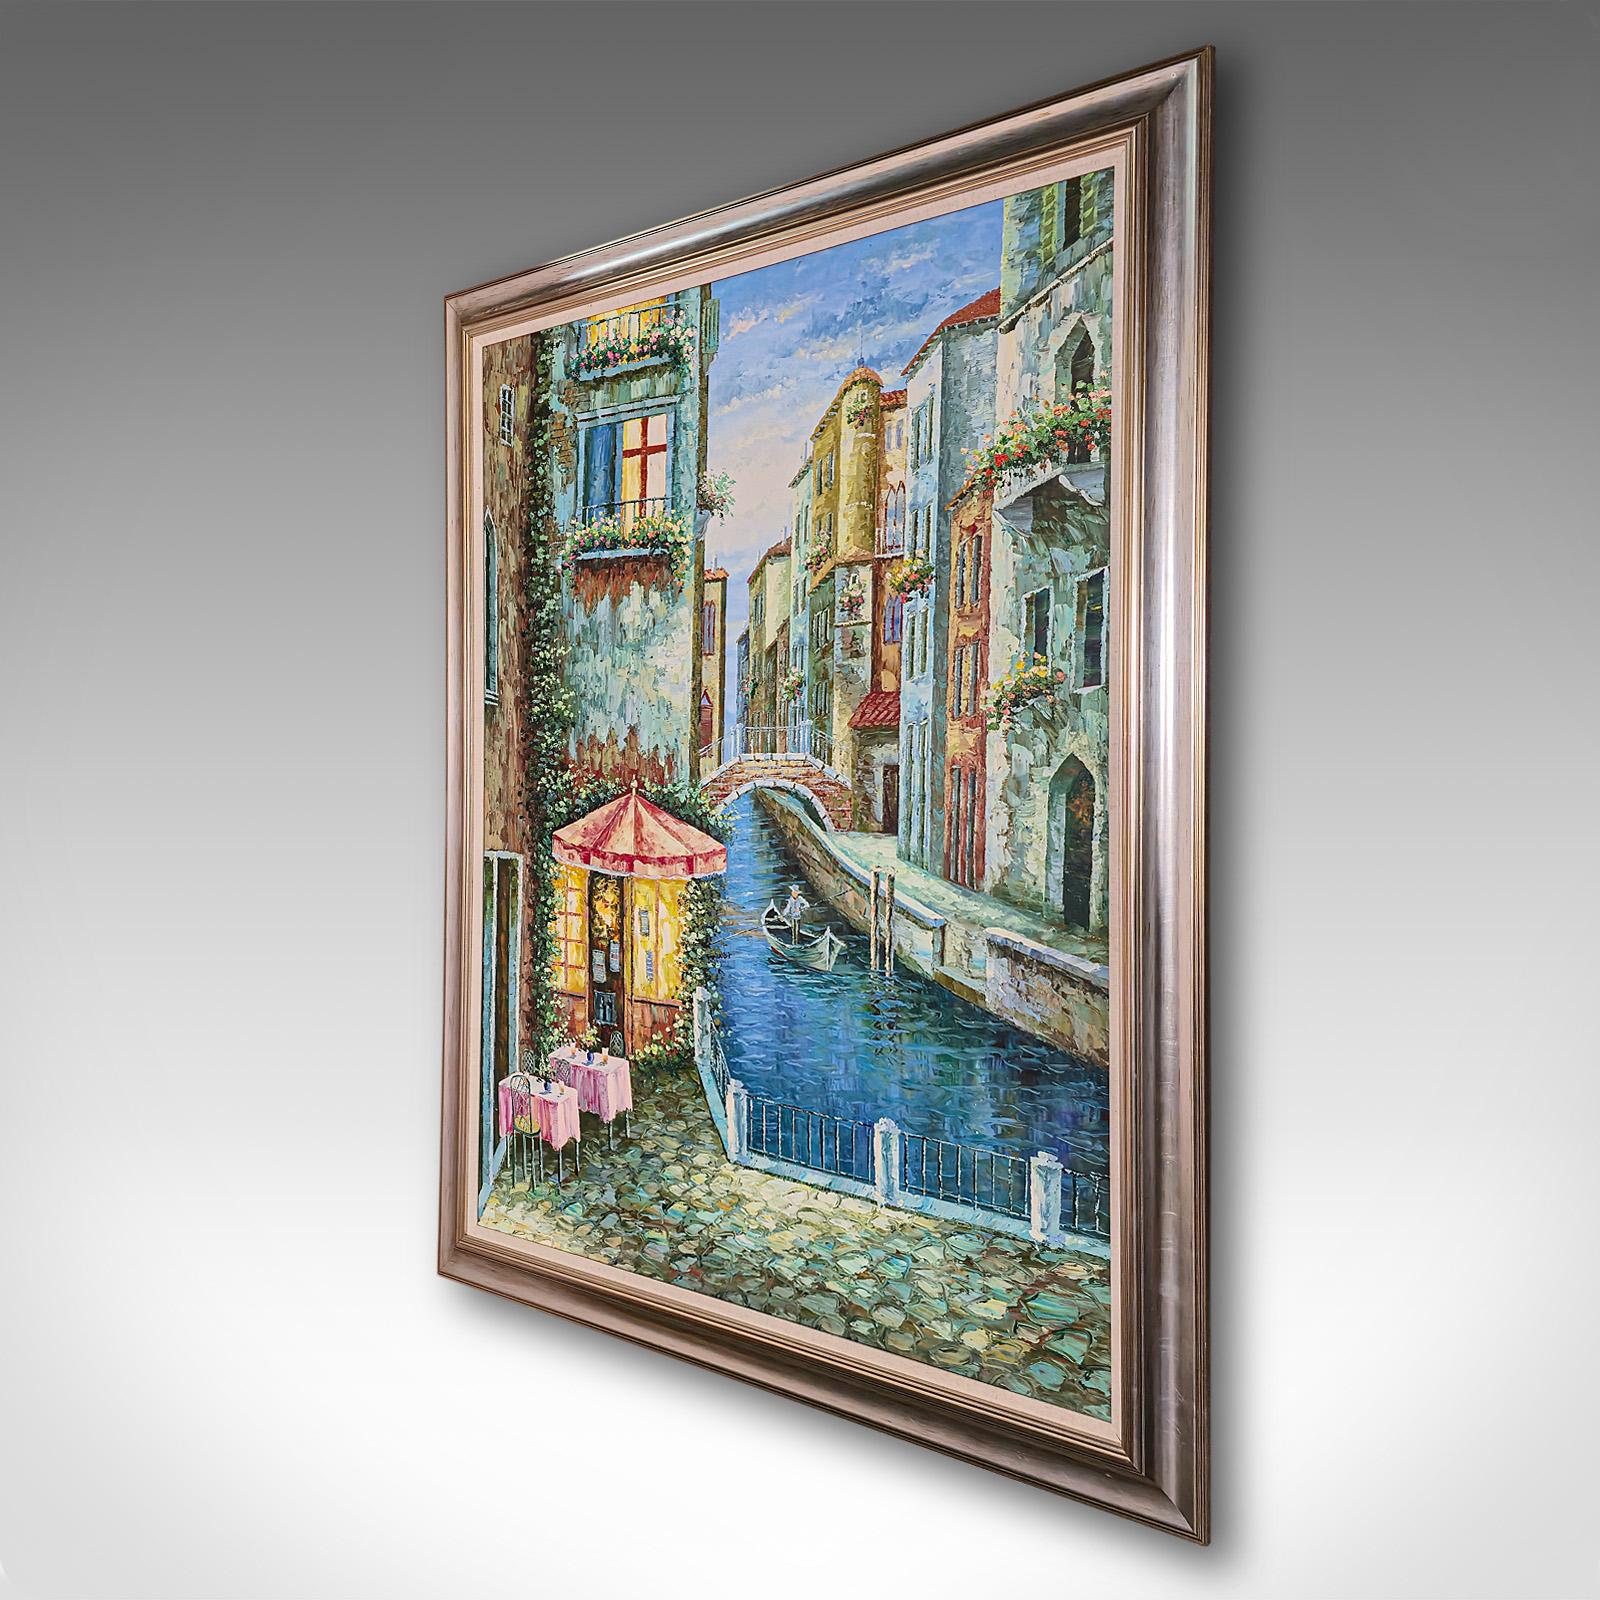 Unknown Large Vintage Oil on Canvas, Venice, Painting, Venetian Street Scene, Framed Art For Sale